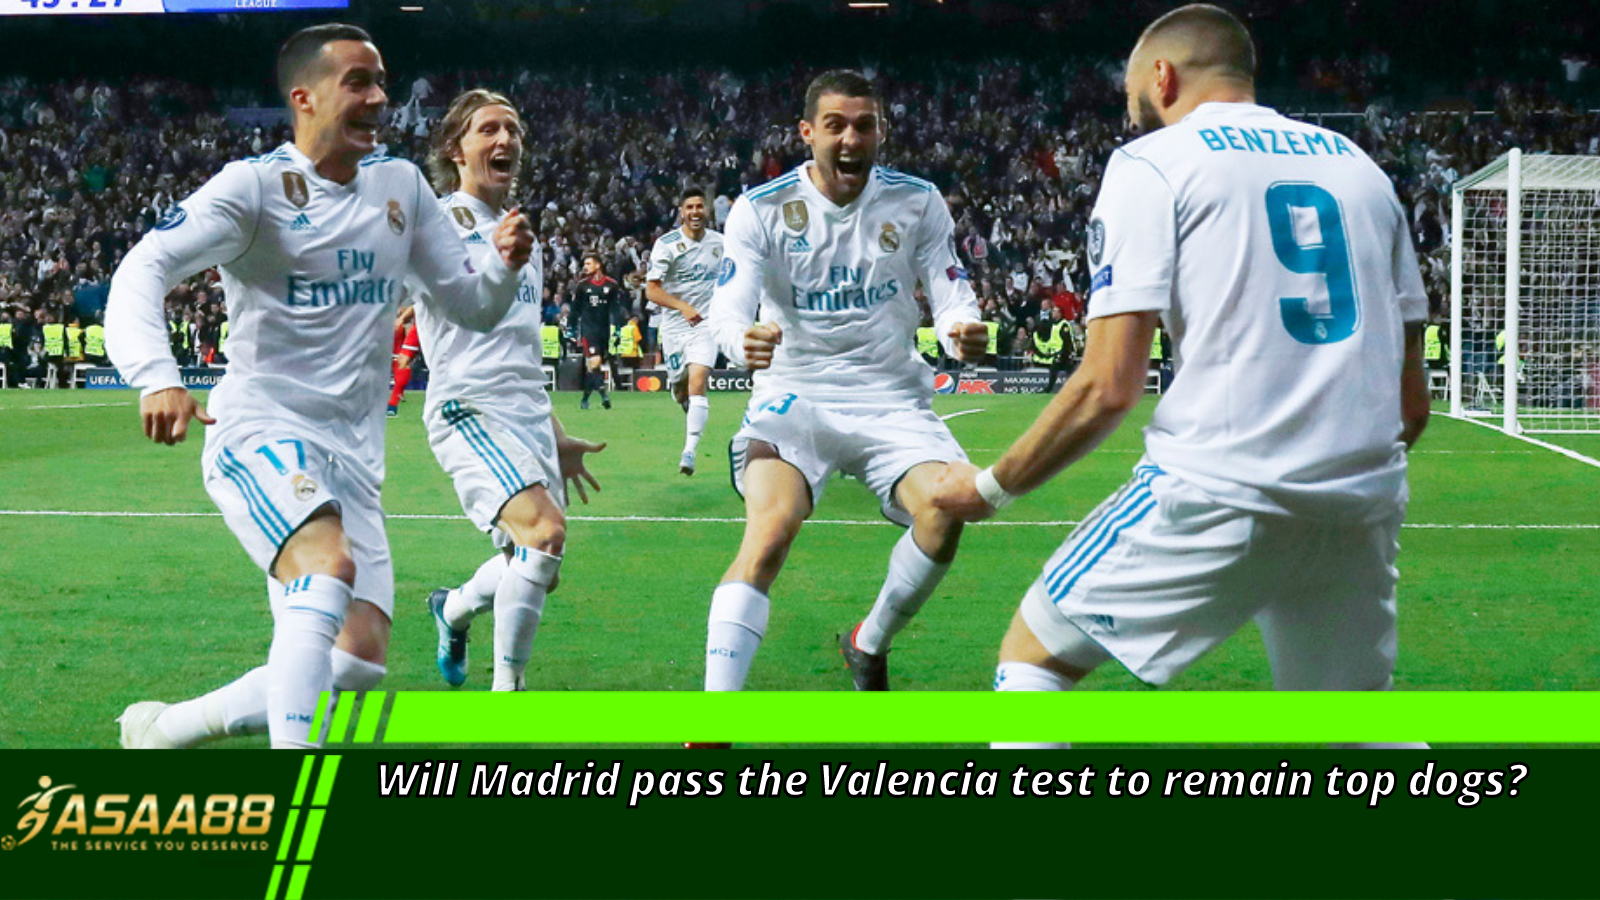 Will Madrid pass the Valencia test to remain top dogs?